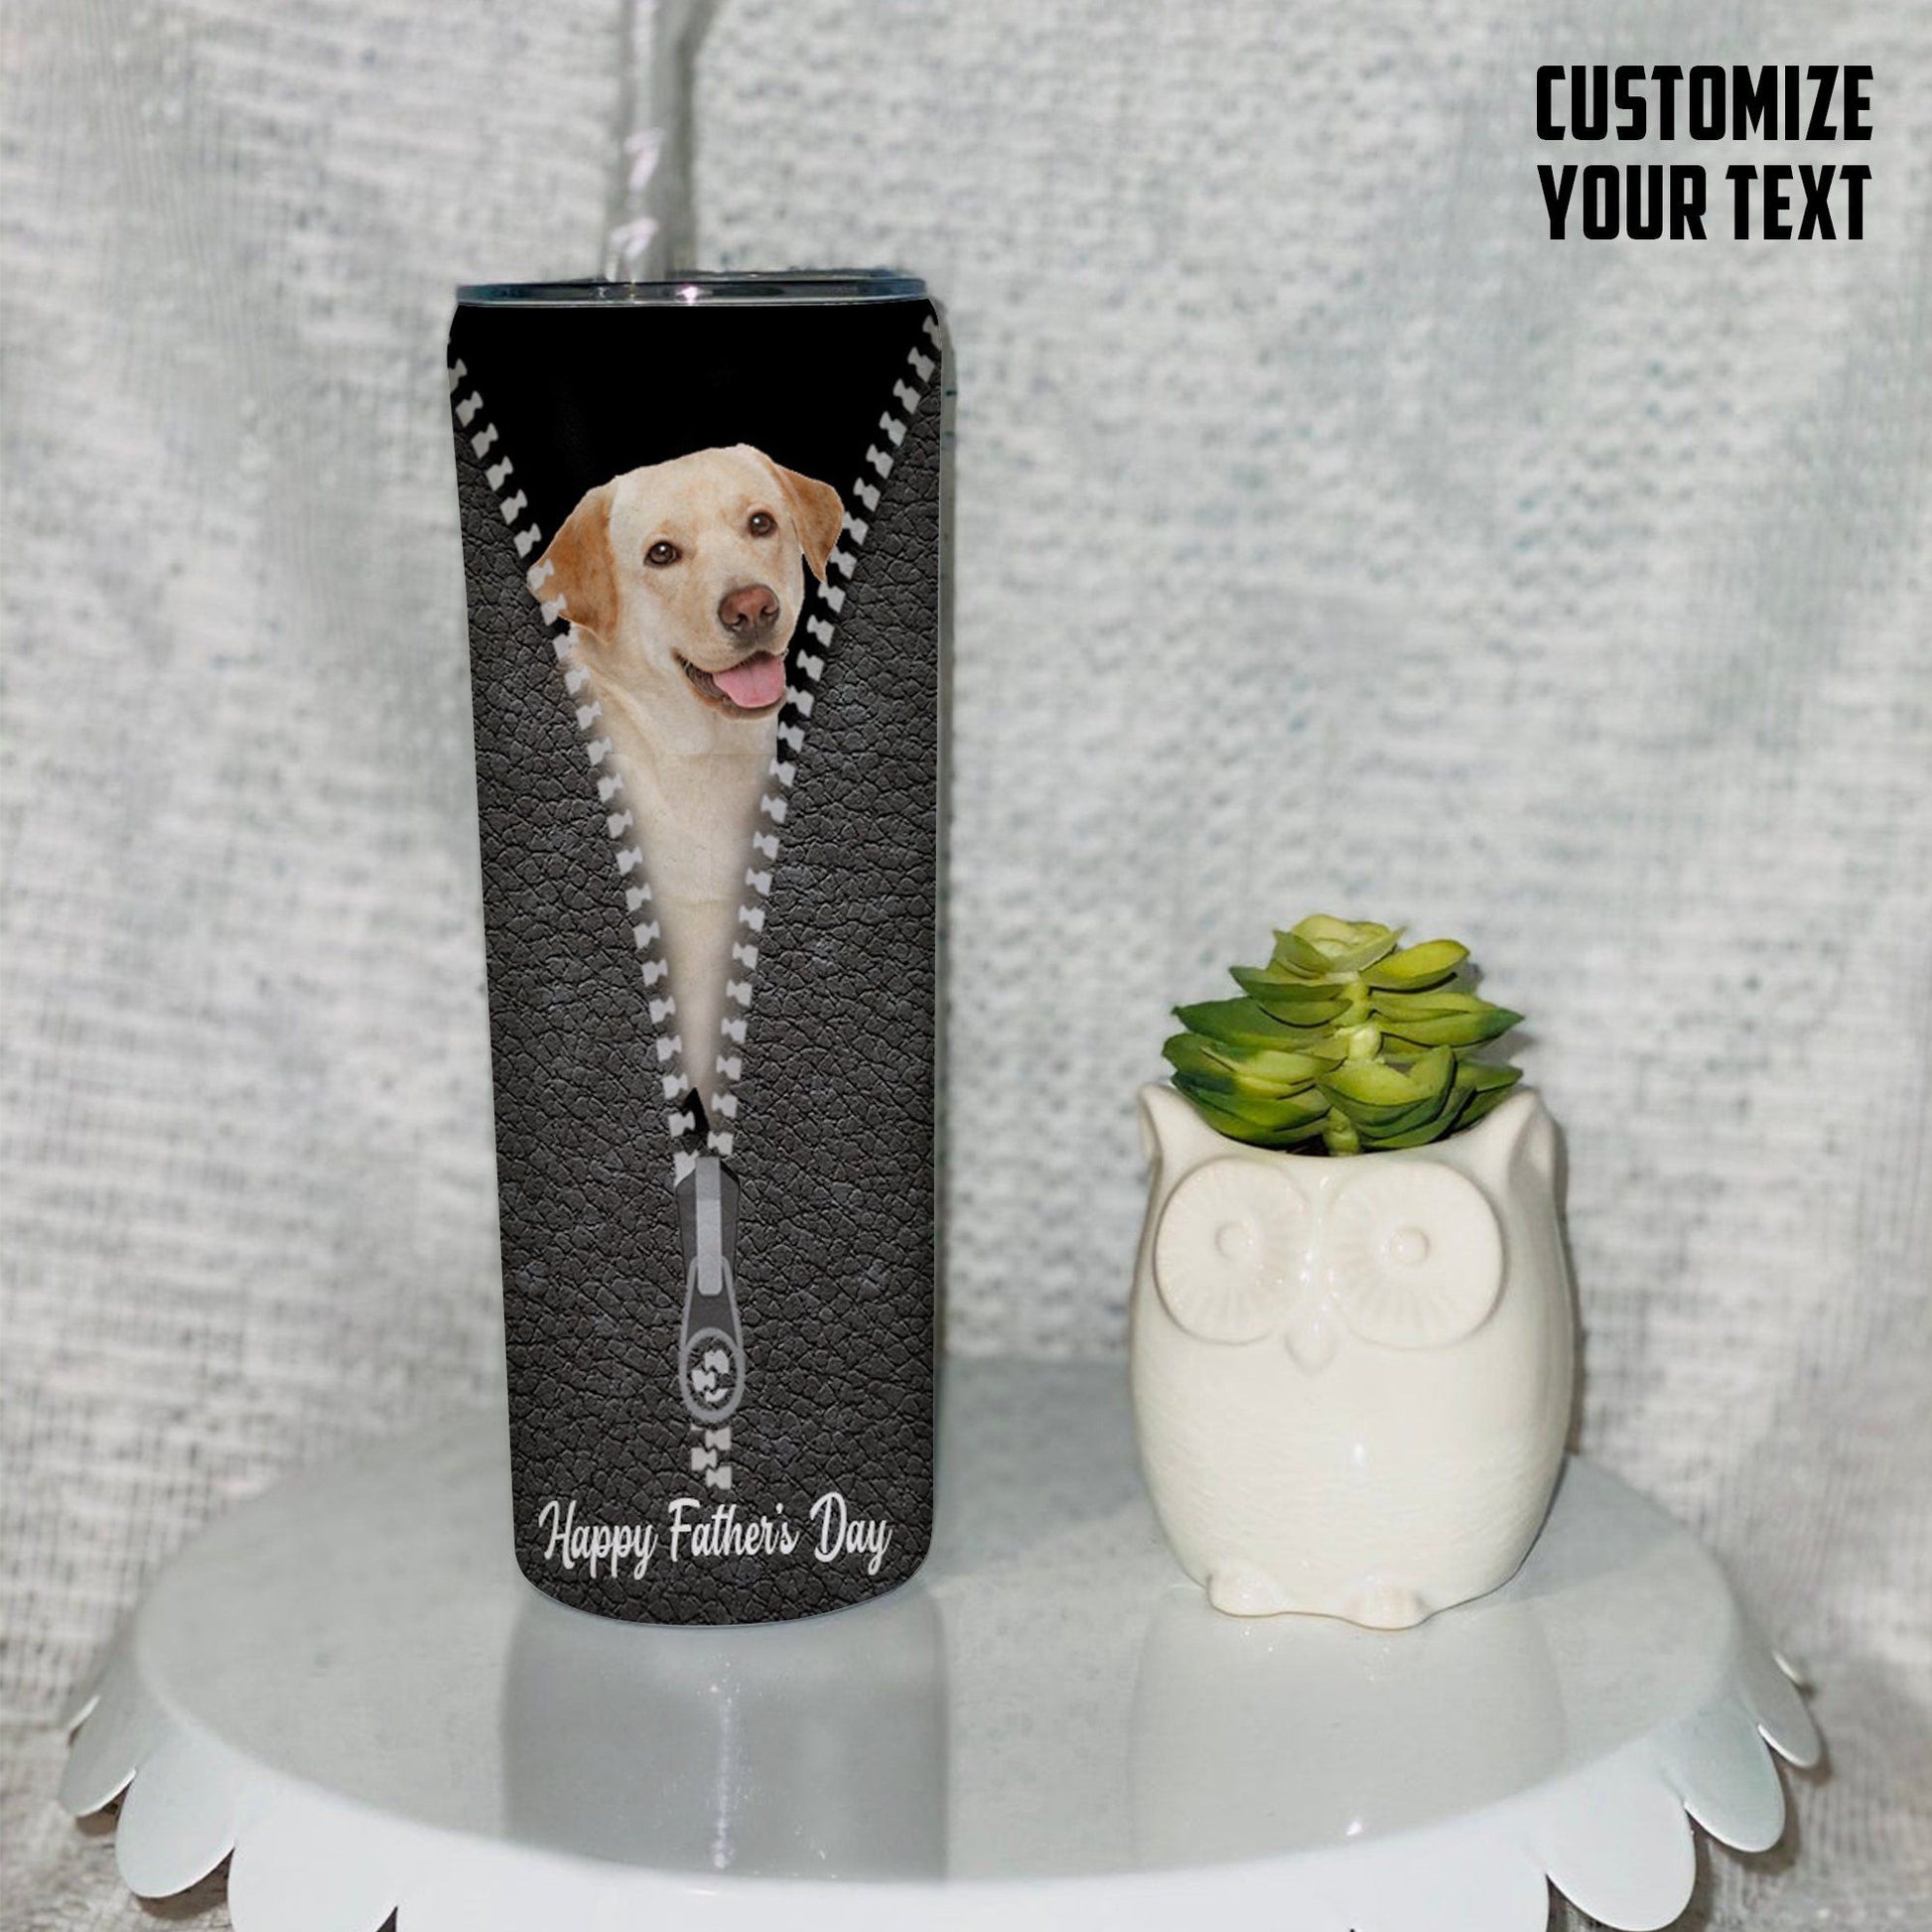 Gearhumans [Best Gift For Father's Day] 3D Dear Dog Dad Fathers Day Gift Custom Name Tumbler Labrador Retriever Dog GS2004216 Tumbler 